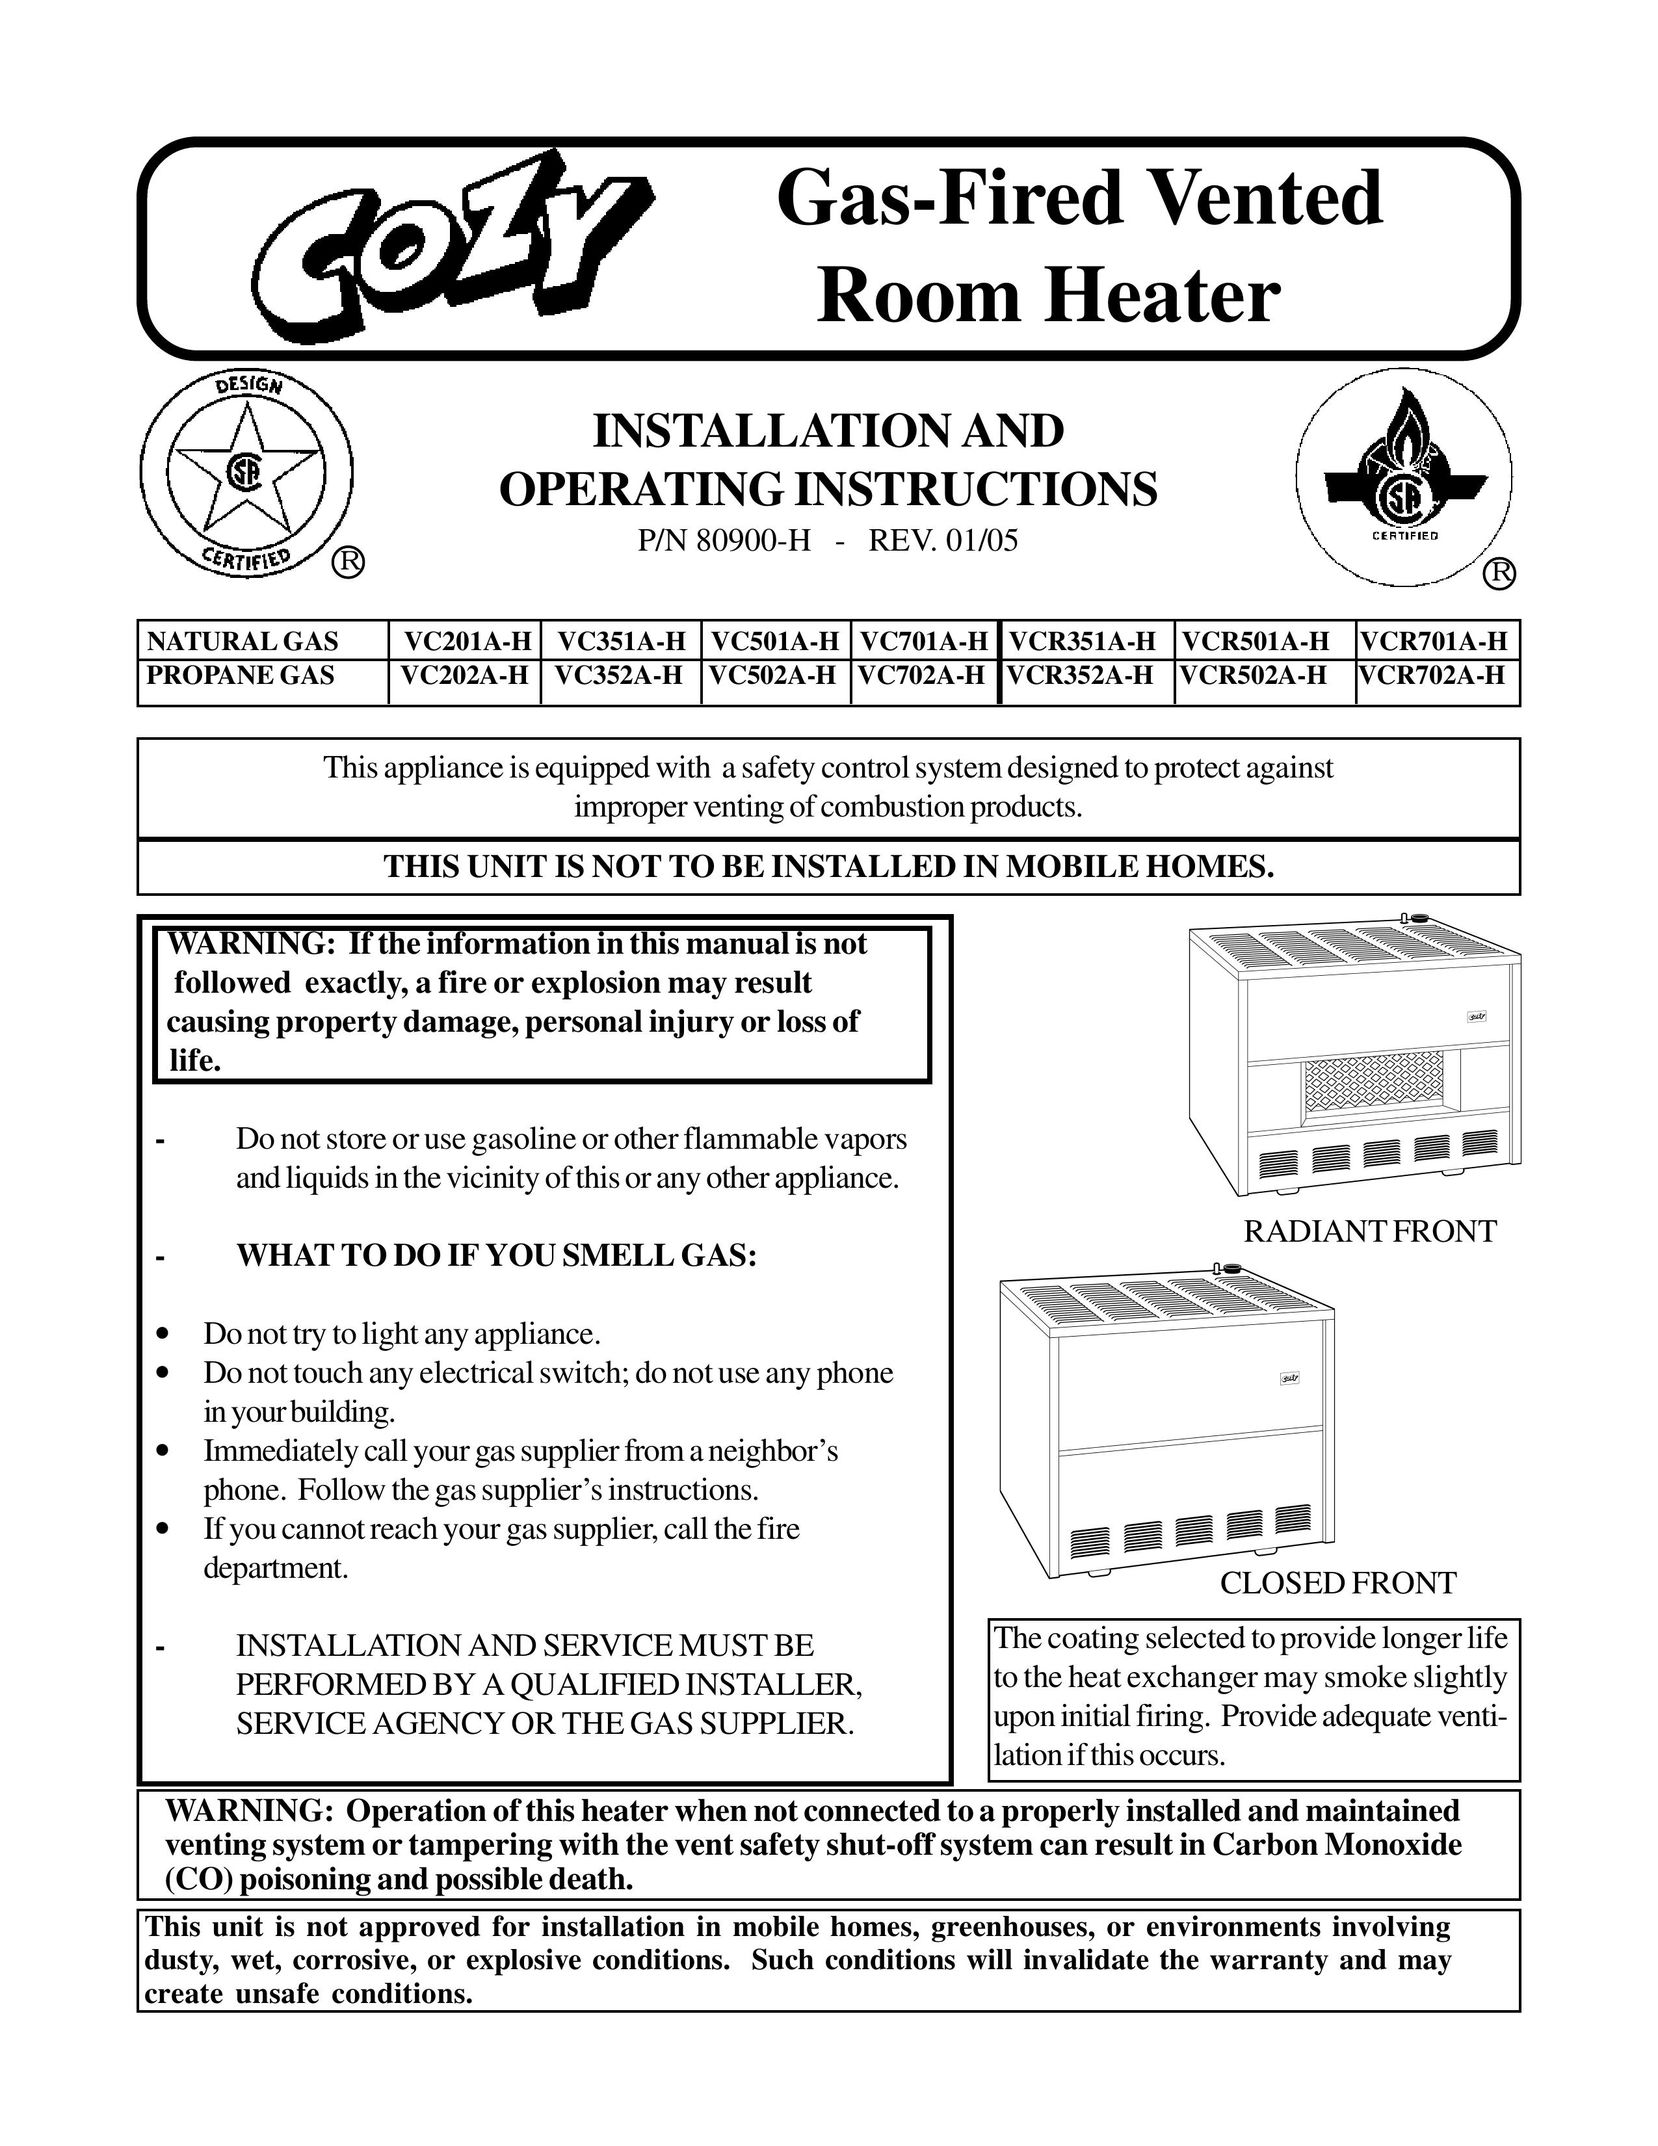 Louisville Tin and Stove VC702A-H Electric Heater User Manual